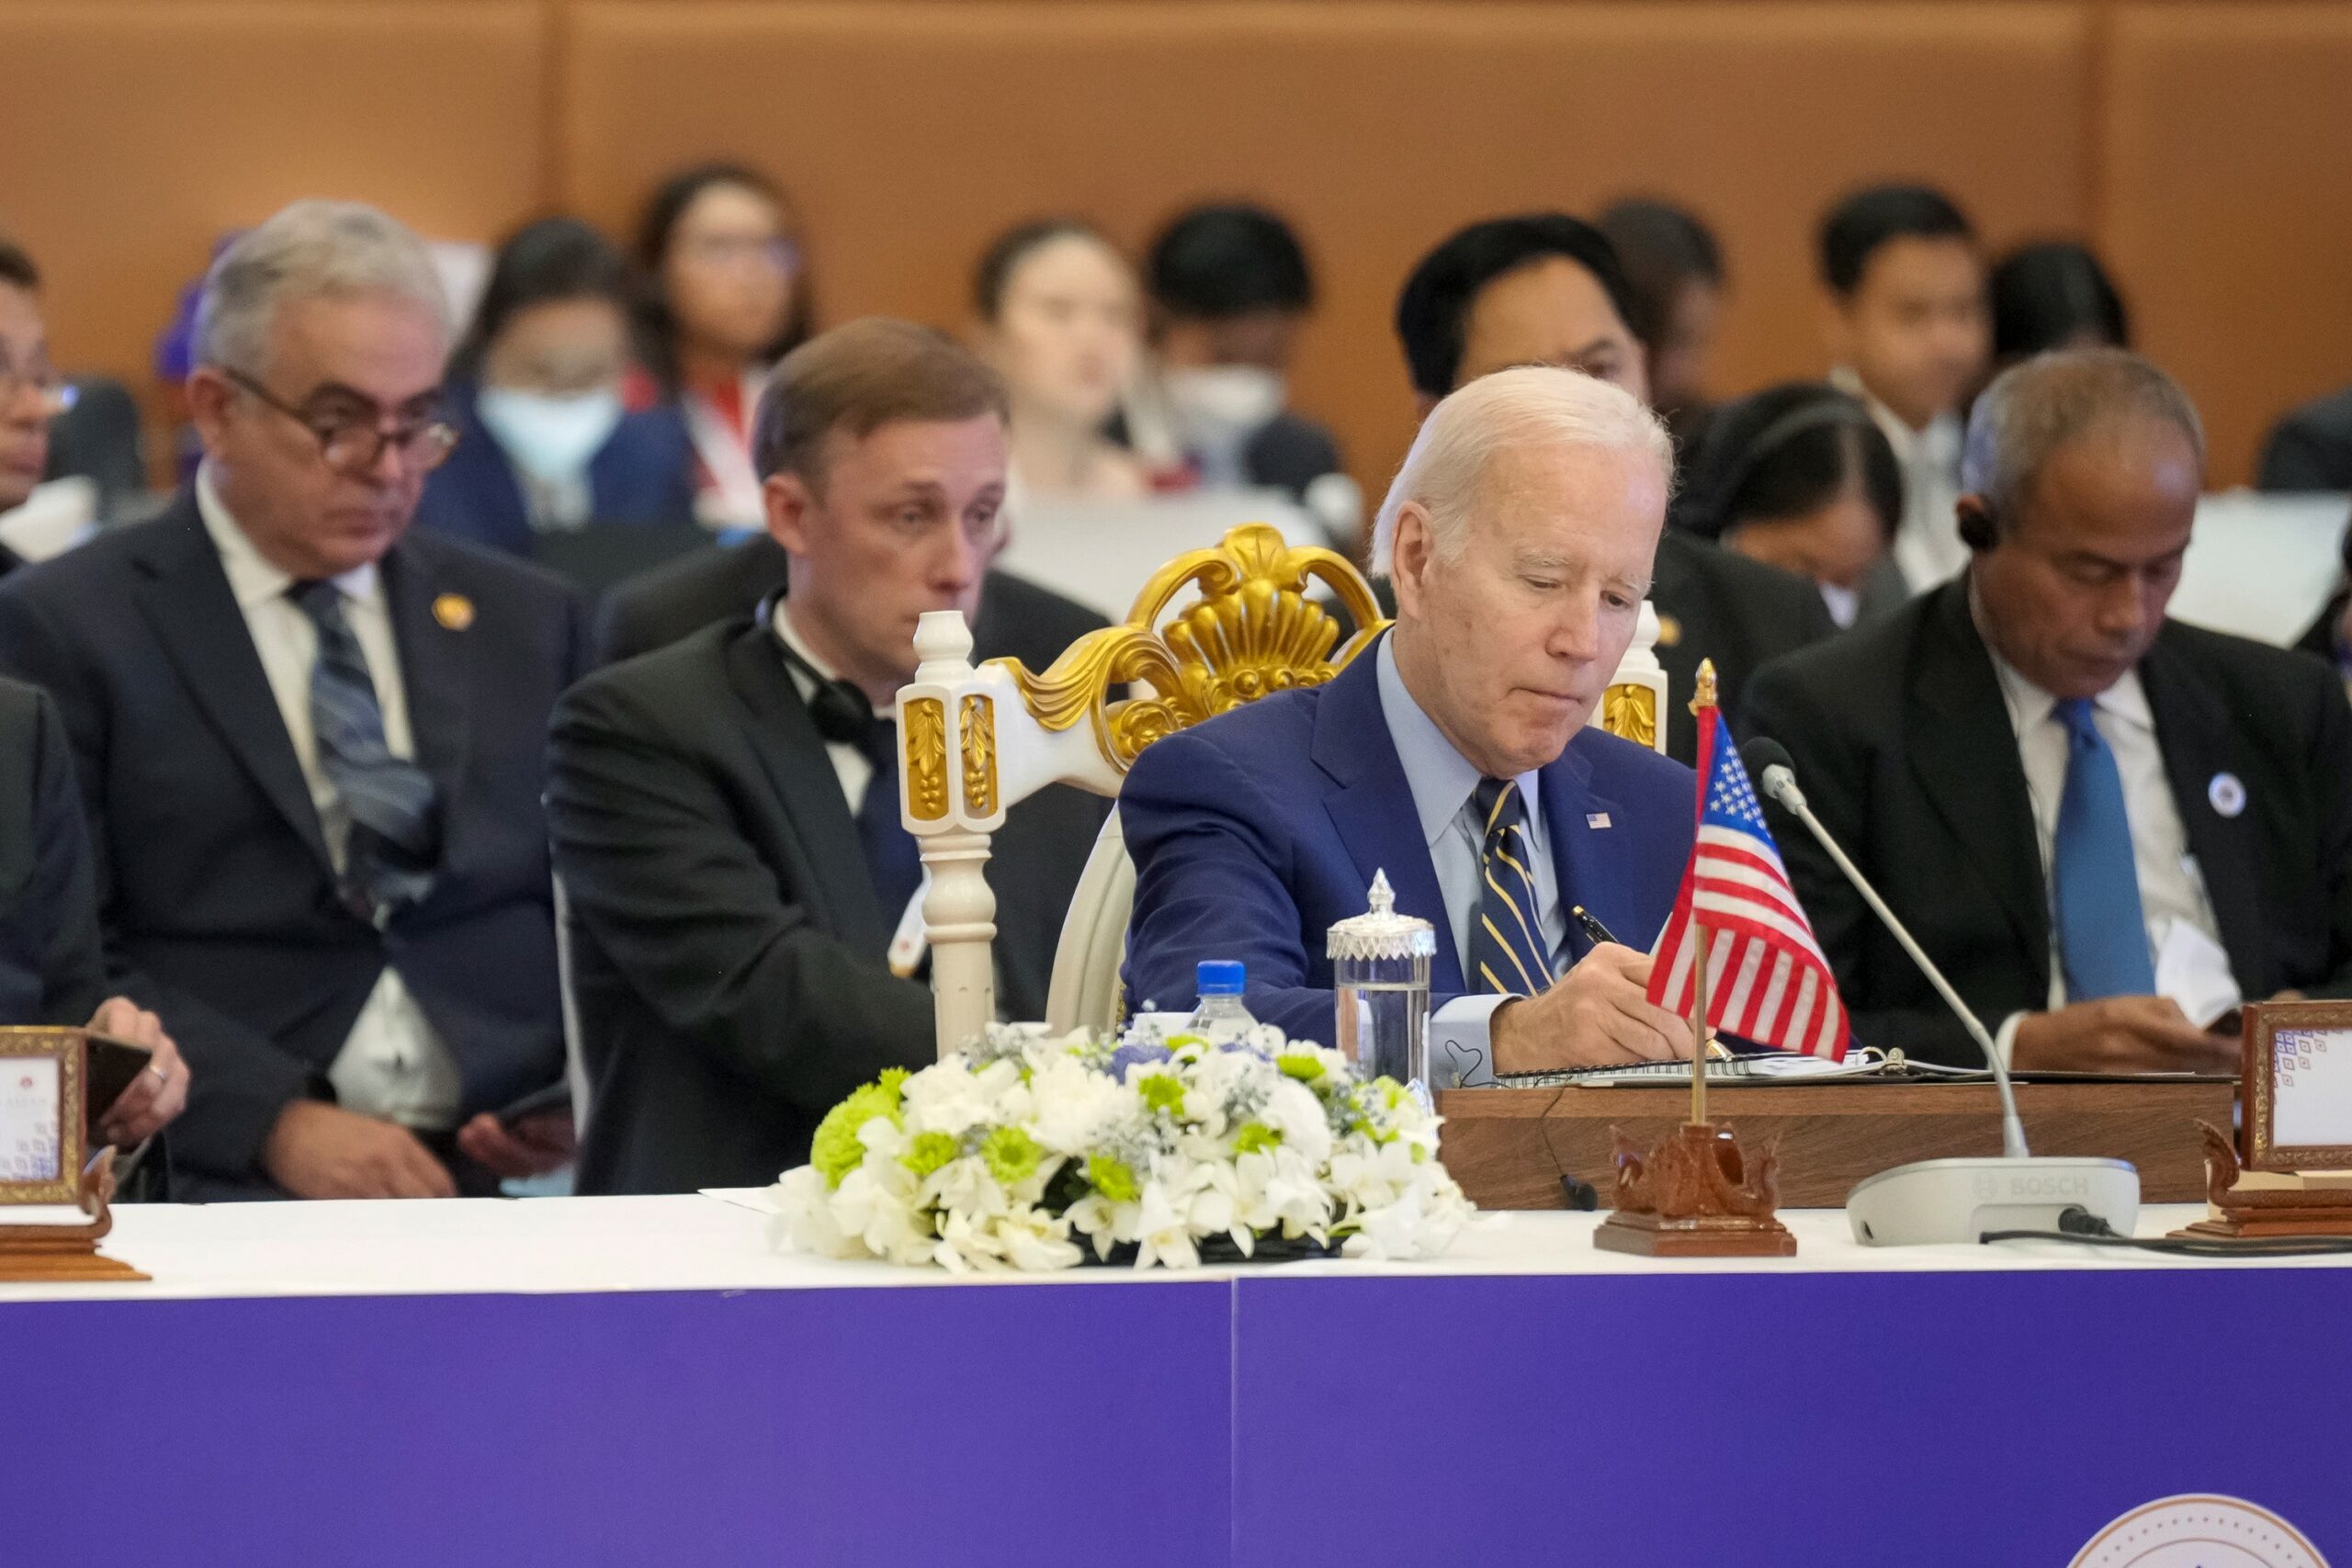 Biden seated at conference table